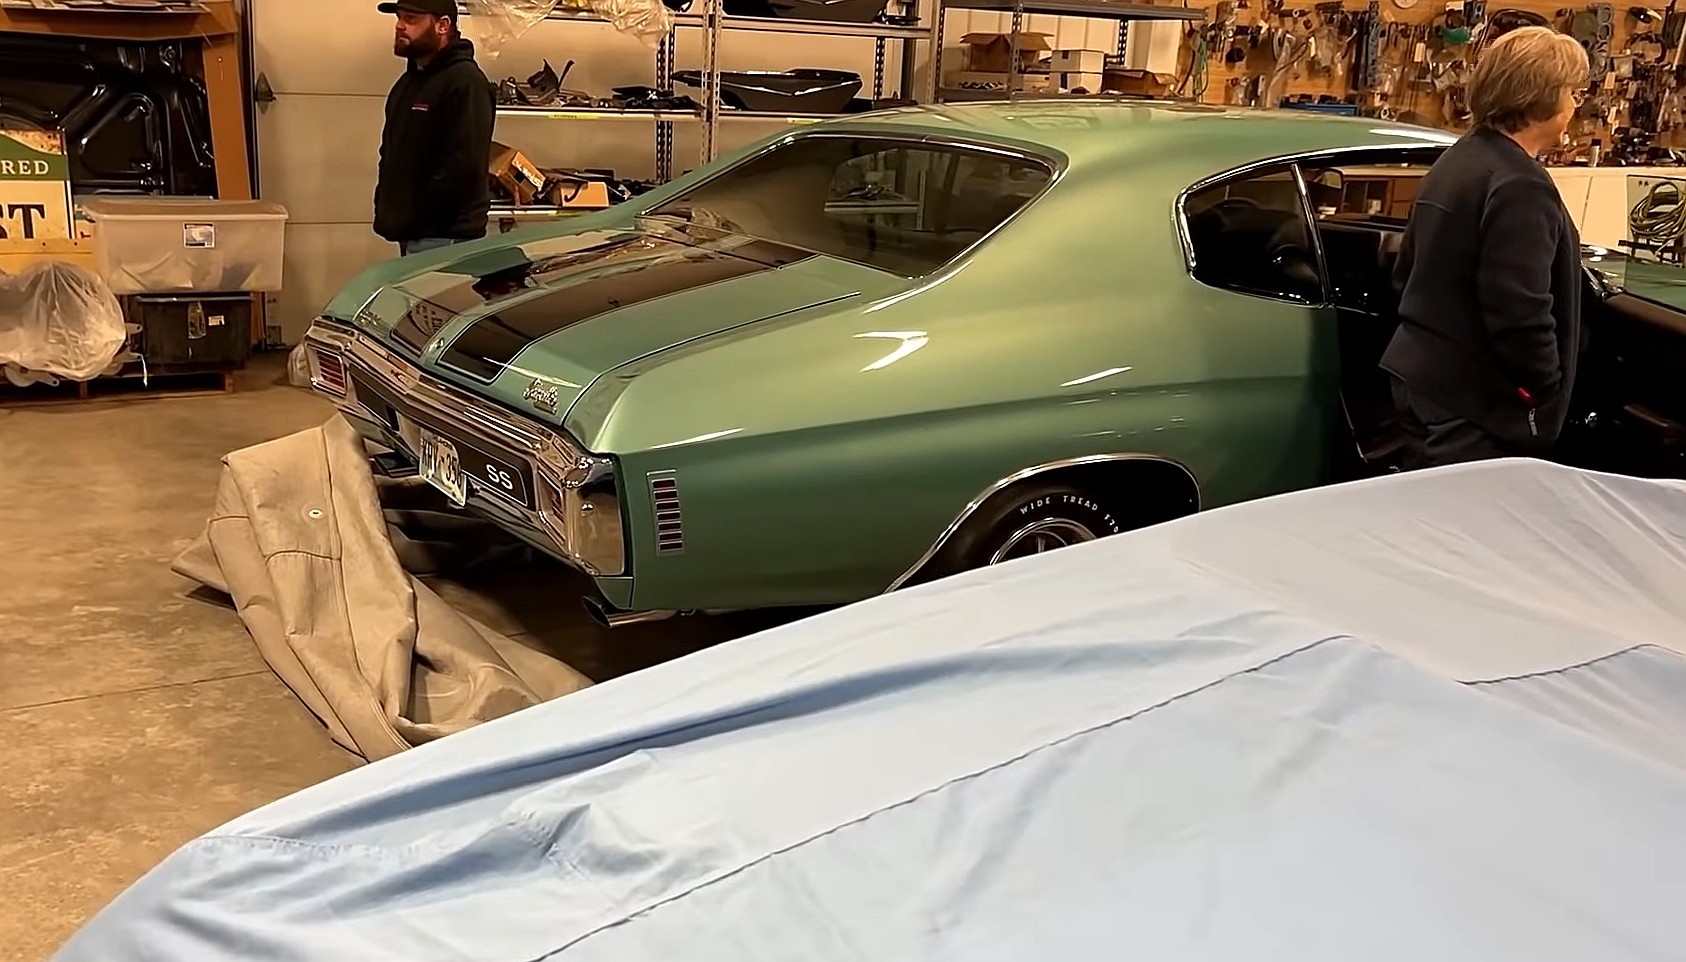 epic barn find includes 39 chevrolet camaro and chevelle classics a few rare ones too 5